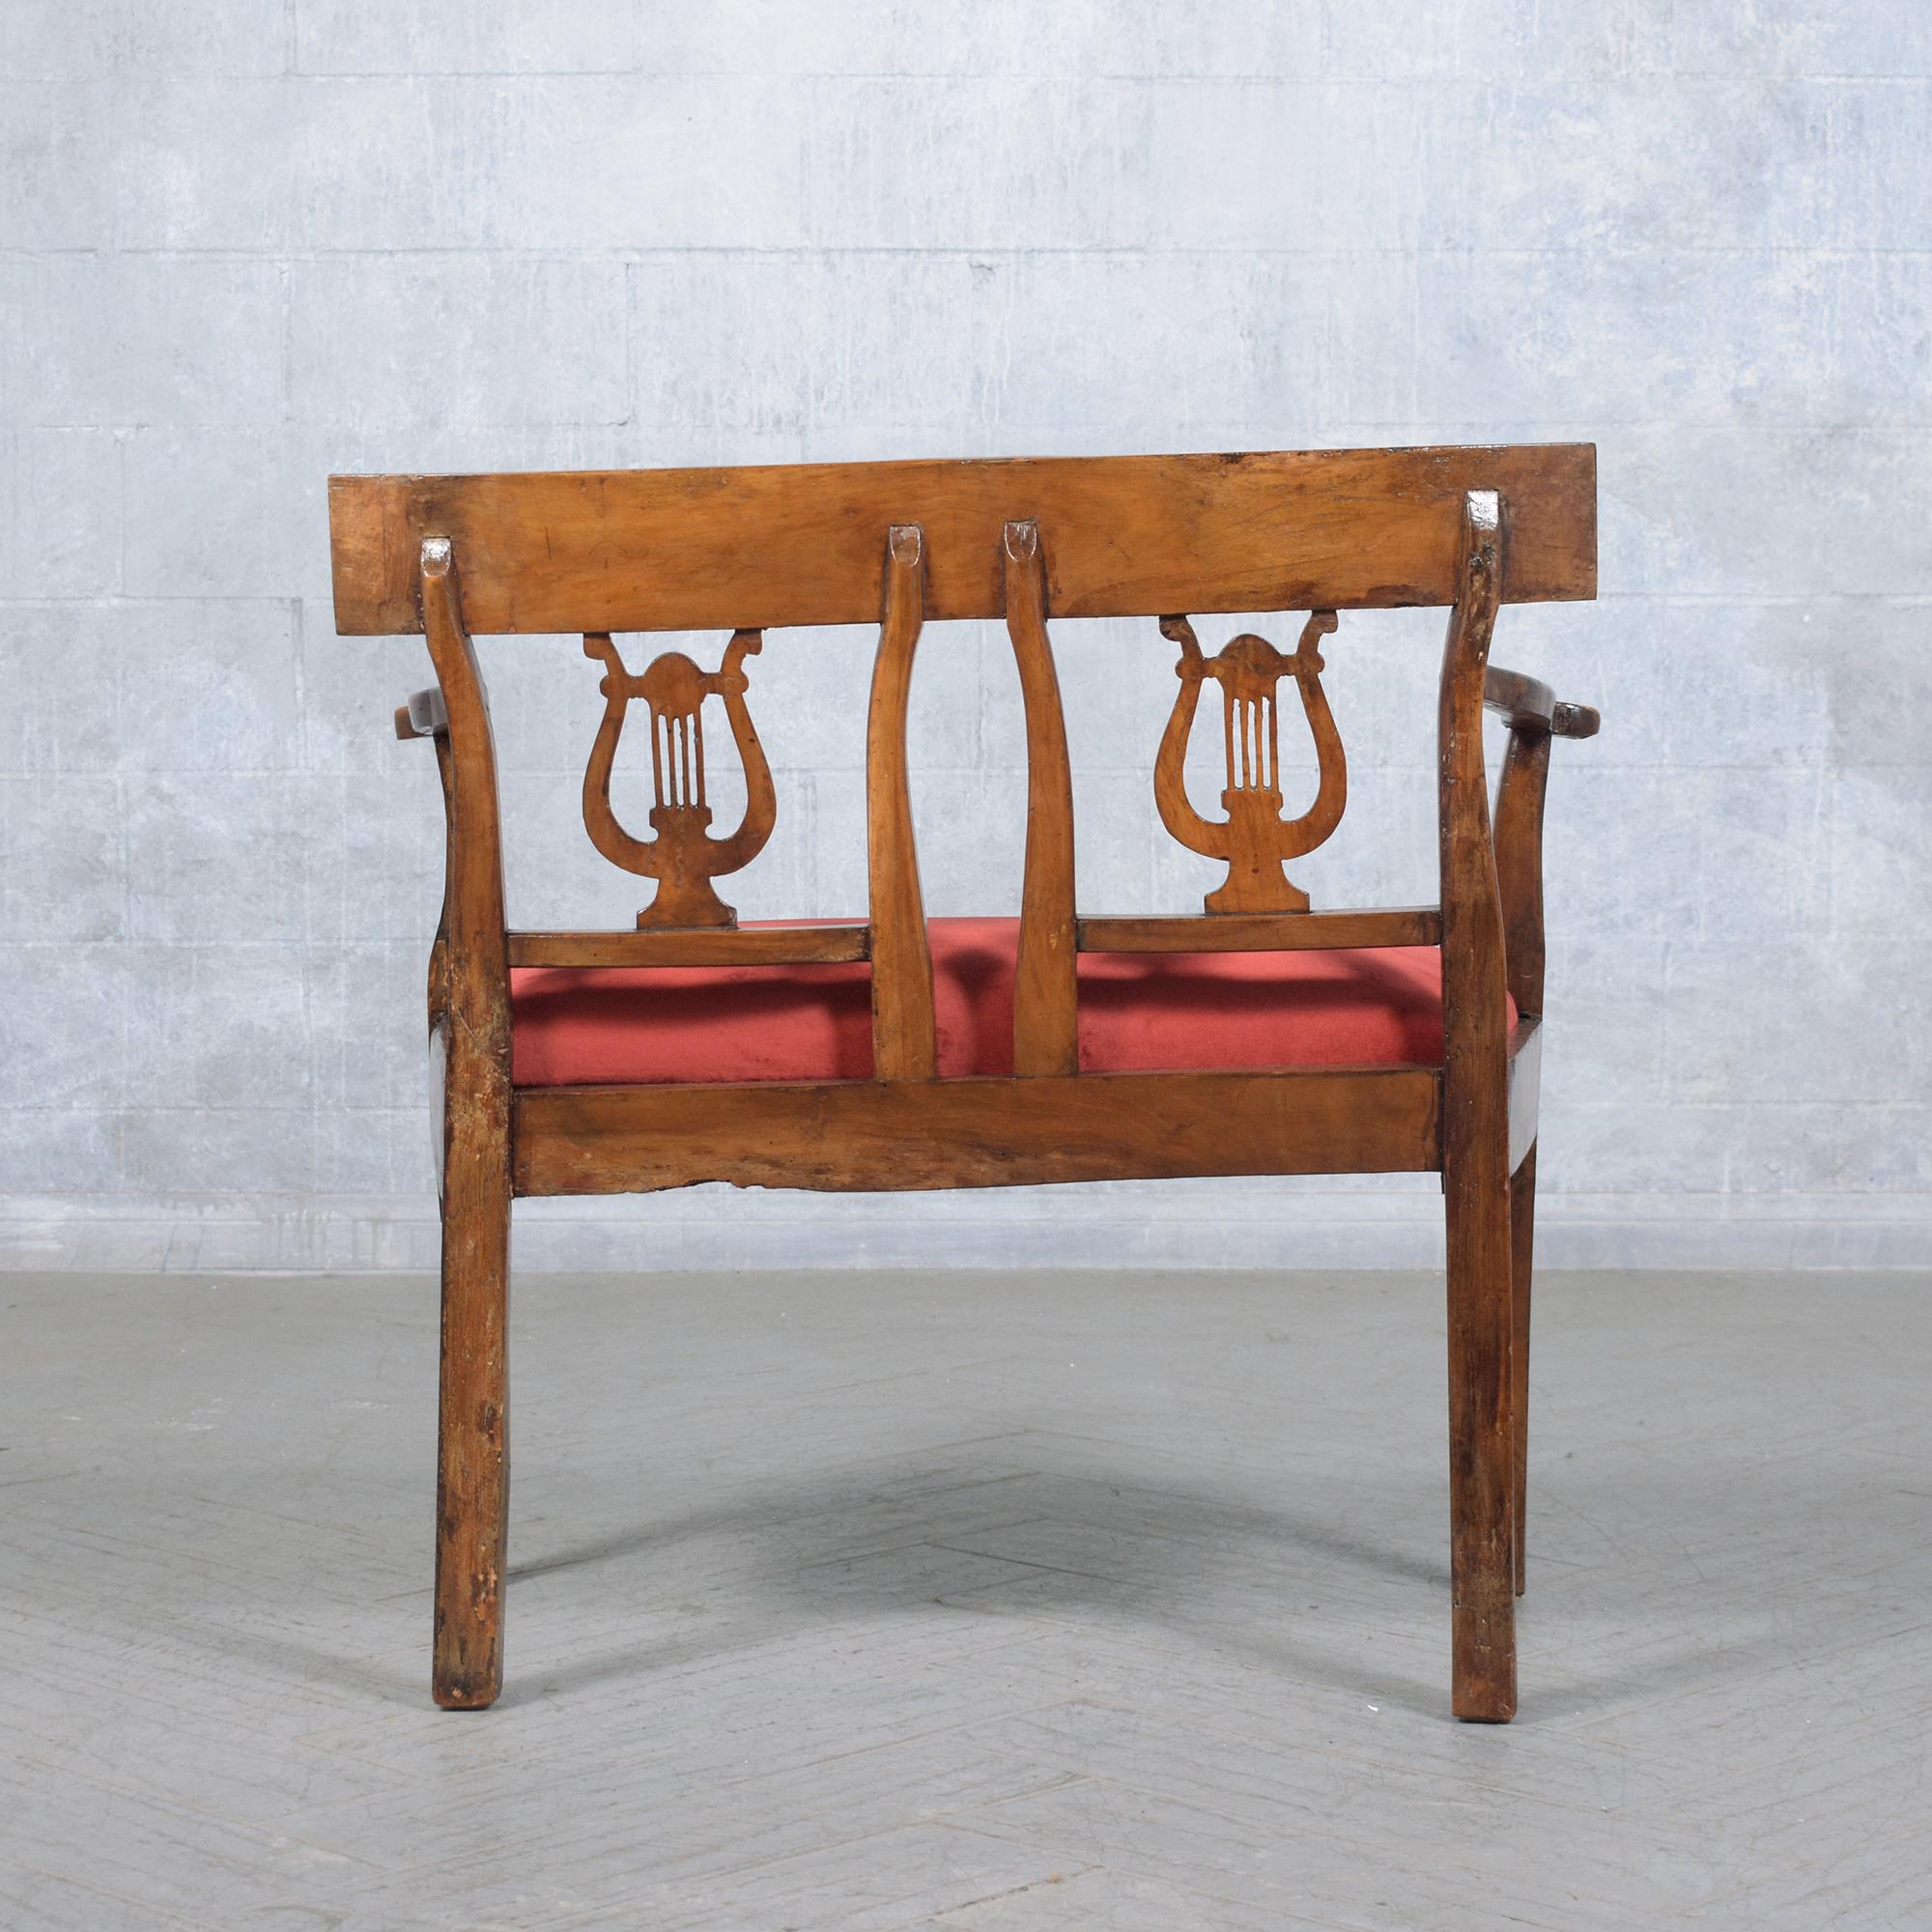 Late 18th-Century English Walnut Bench: Historical Craftsmanship Restored For Sale 6